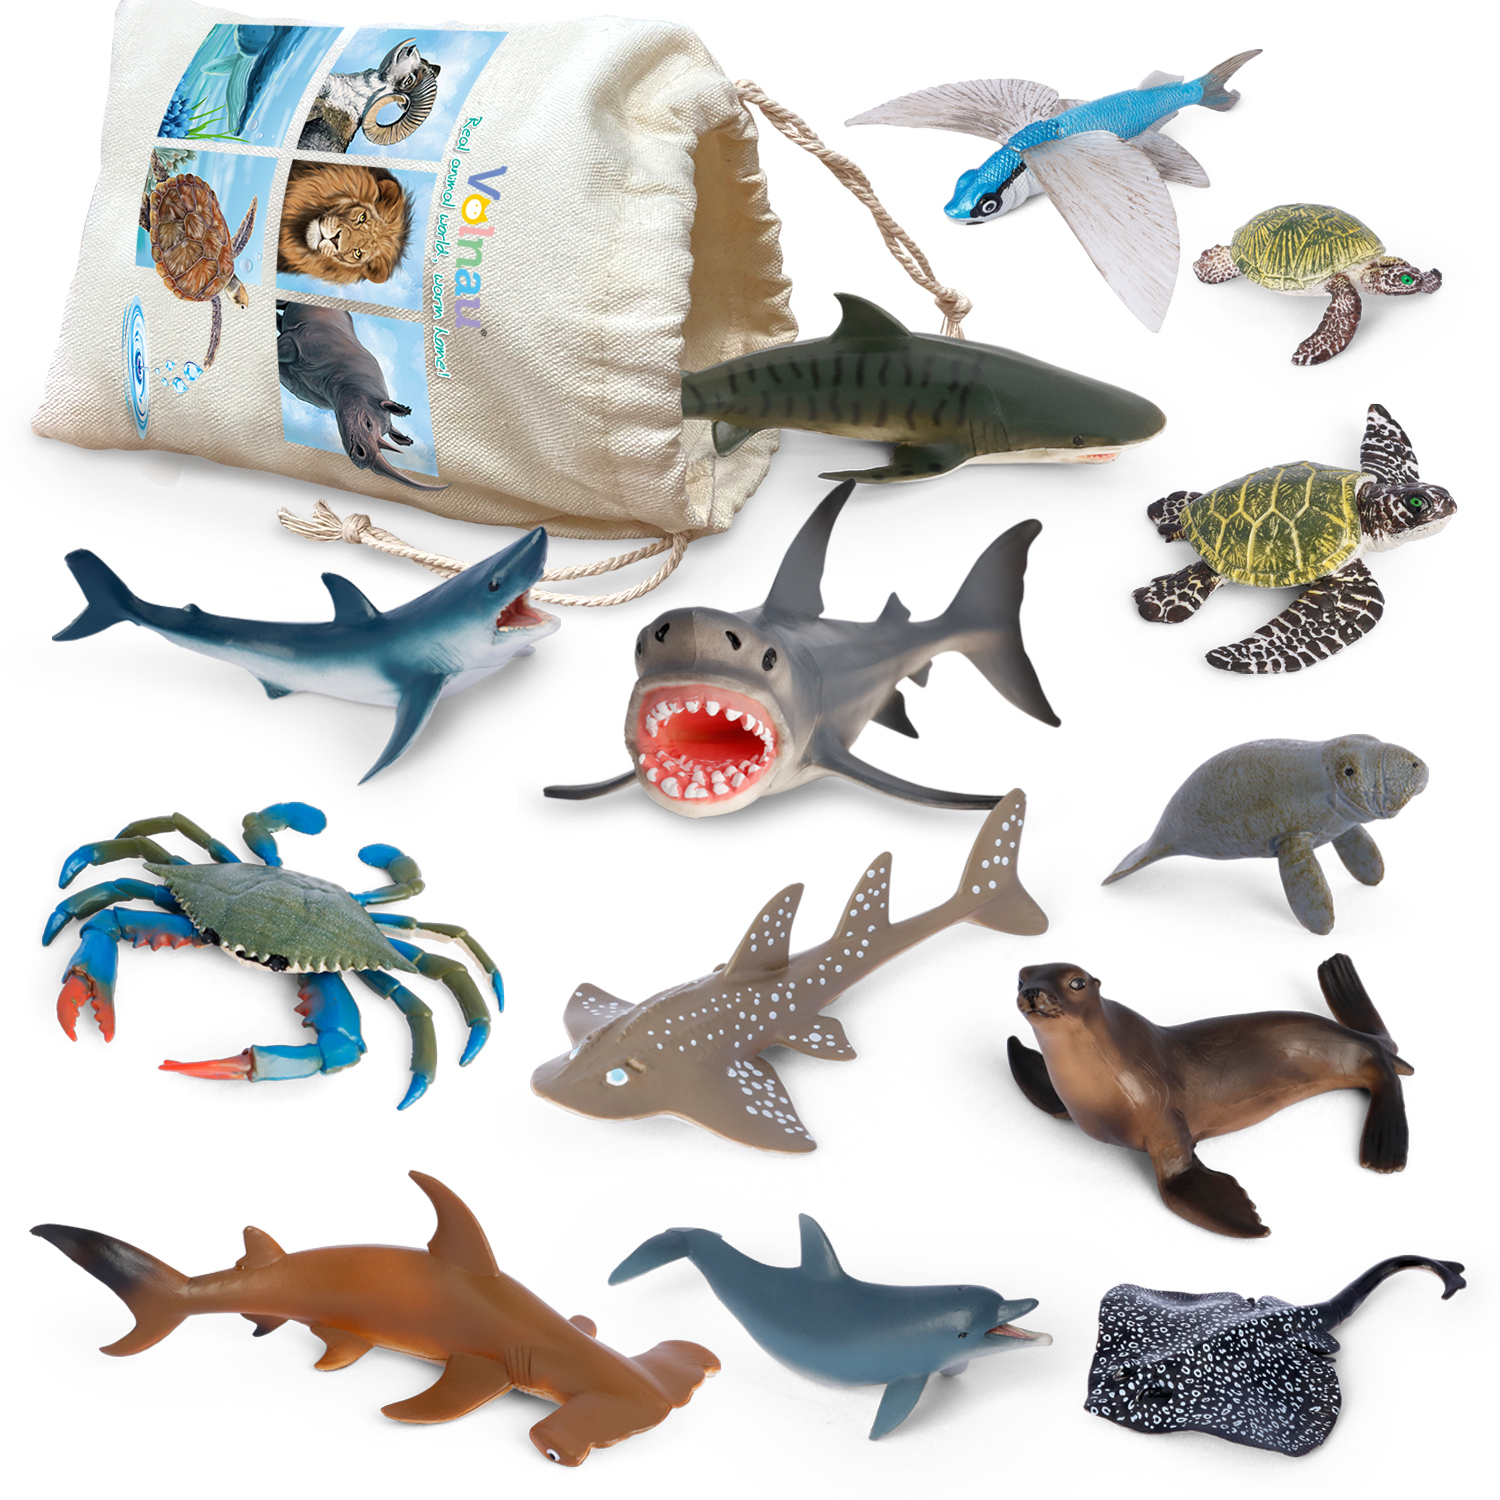 Free shipping Delivery freebies are shared everyday wholesale prices Wild  Sea Life Hammerhead Shark Model Ocean Animal Educational Toy Figure  